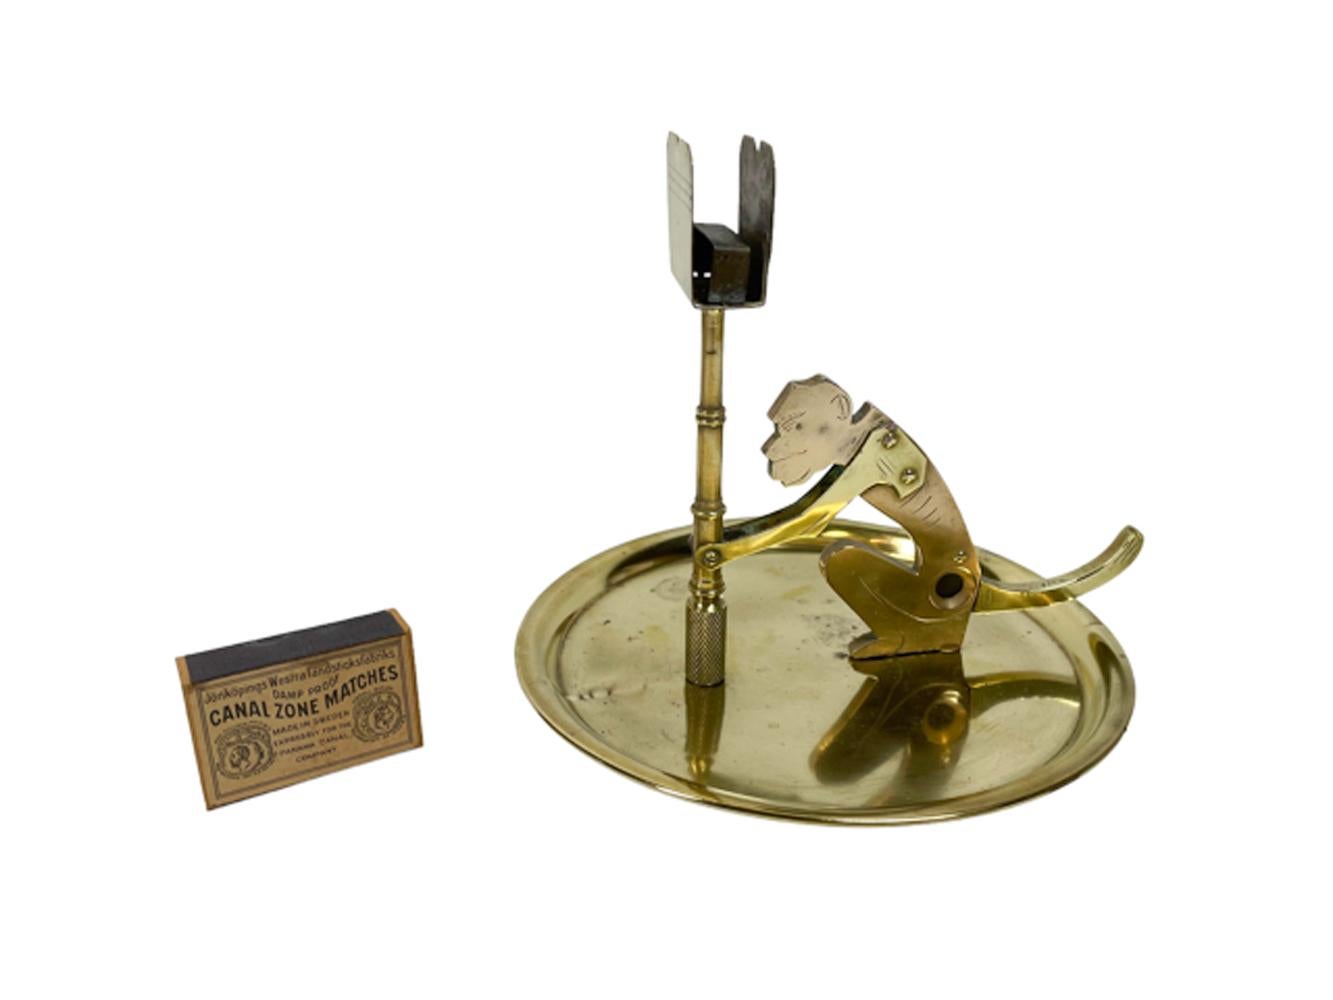 Early twentieth century cigar cutter in the form of a monkey holding a lamp post which holds a match box, on a circular ashtray base. The body of the monkey is bell metal (brass with high copper content, giving it a pinker color)), the rest is